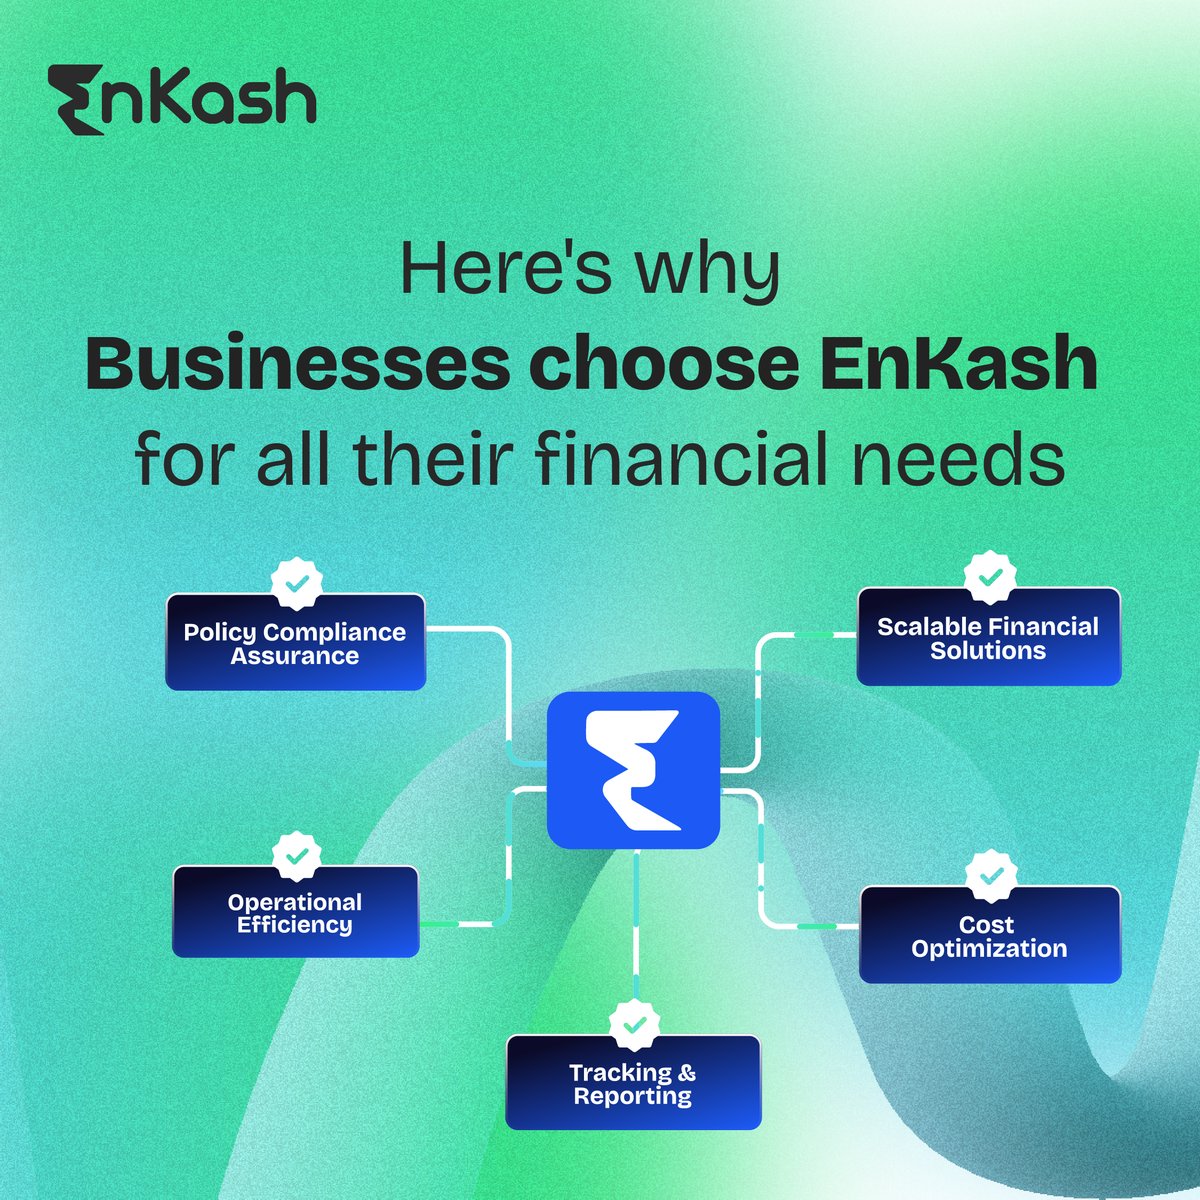 Here's why EnKash is the go-to for businesses: compliance, scalability, cost optimization, tracking & efficiency. Simplify your business finances today for unimaginable growth! #OneStopSolution #EnKash #EnKashBenefits #BusinessFinance #Smartbusinessmove